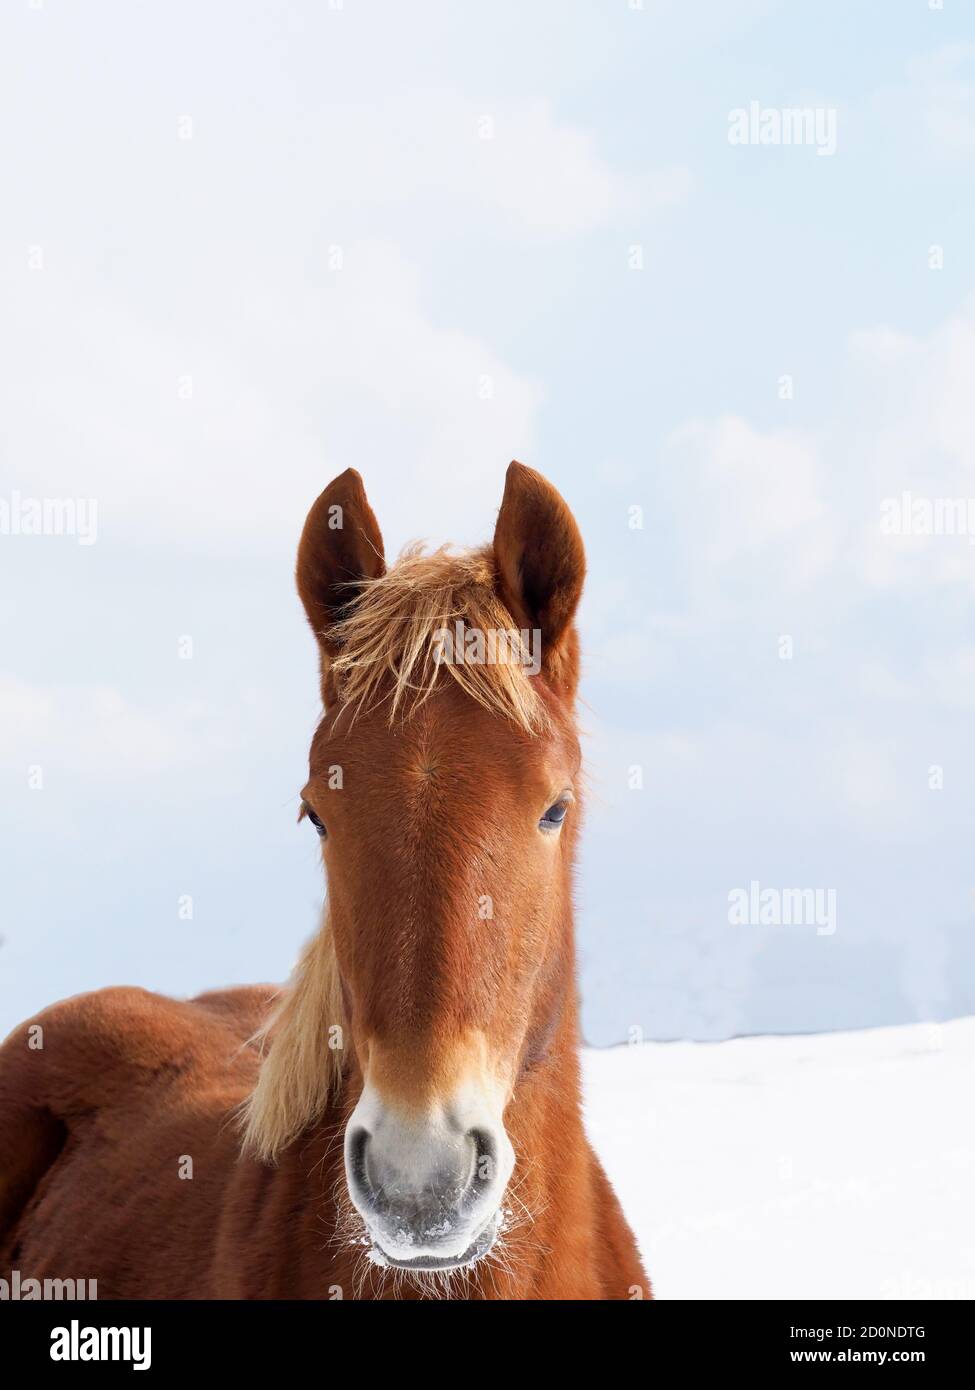 A rare breed Suffolk Punch standing in a snowy landscape. Stock Photo